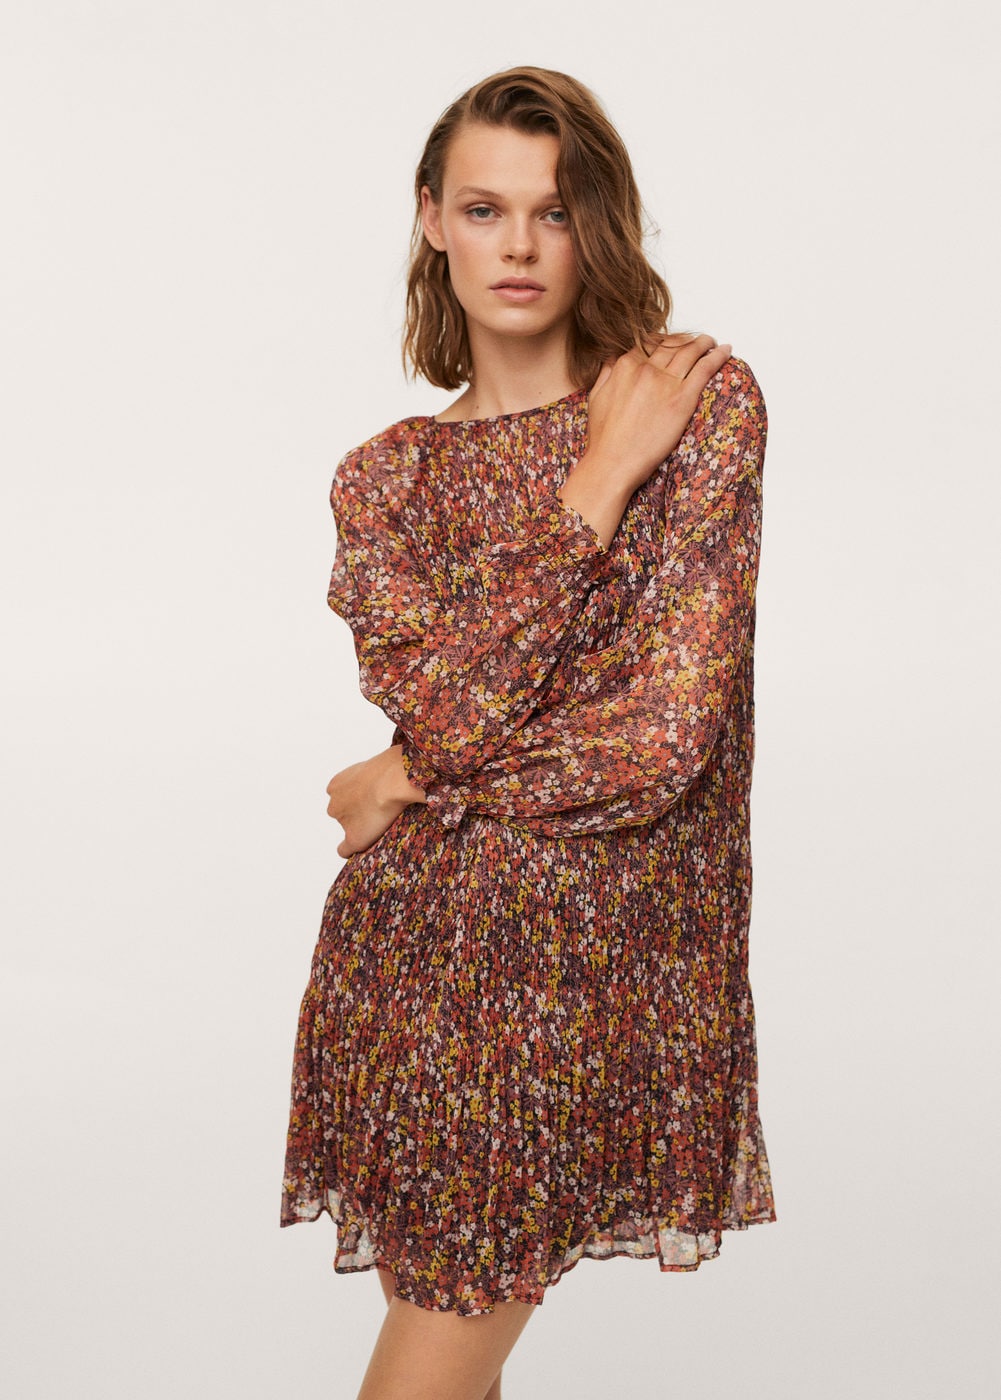 24 Pretty Boho Dresses Perfect for Fall | Who What Wear